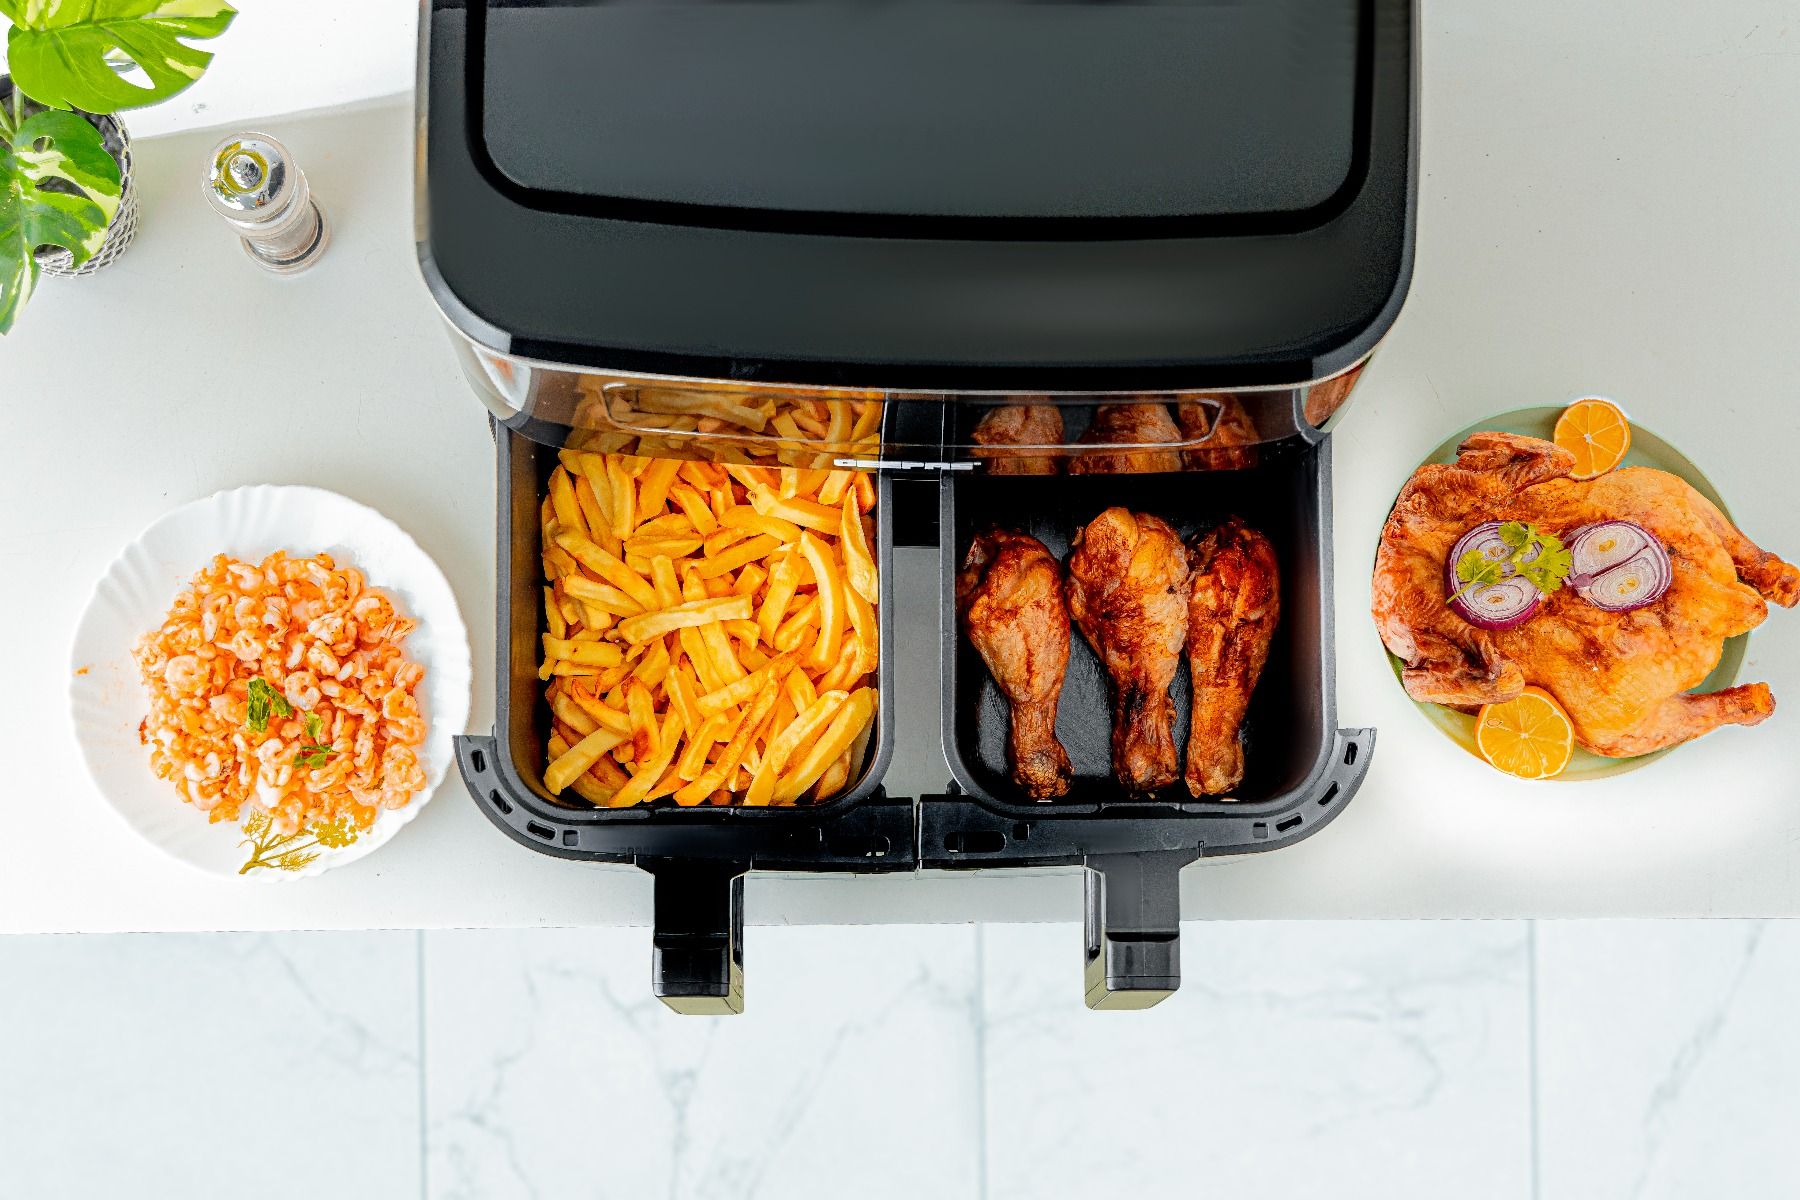 Geepas 9 L Dual Basket Digital Air Fryer- GAF37525UK| Equipped With VORTEX Air Frying Technology, Oil Free Cooking| LED Display With Touch Screen